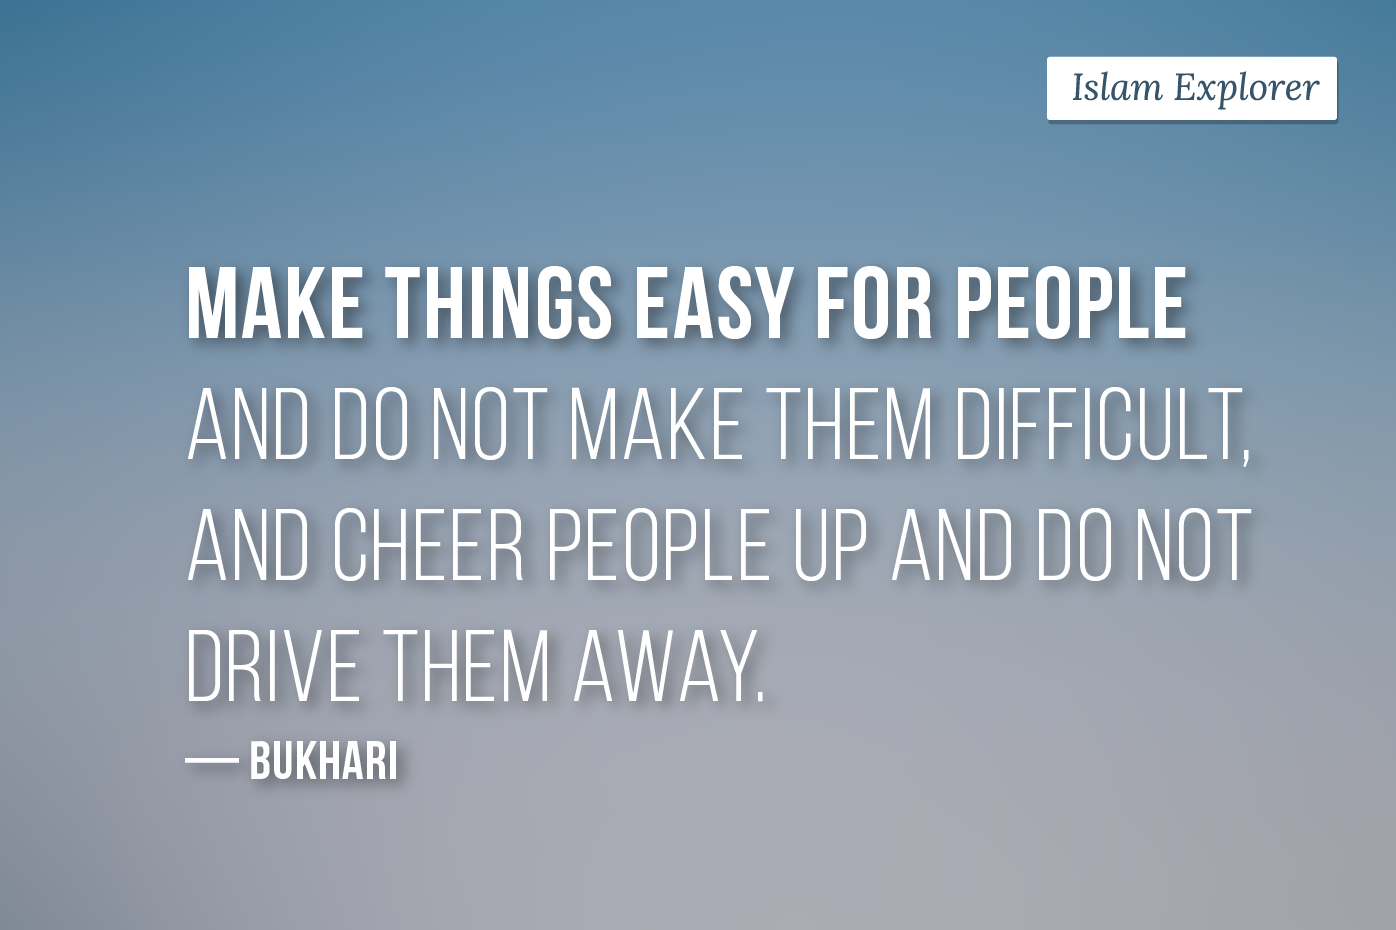 Make things easy for people and do not make them difficult